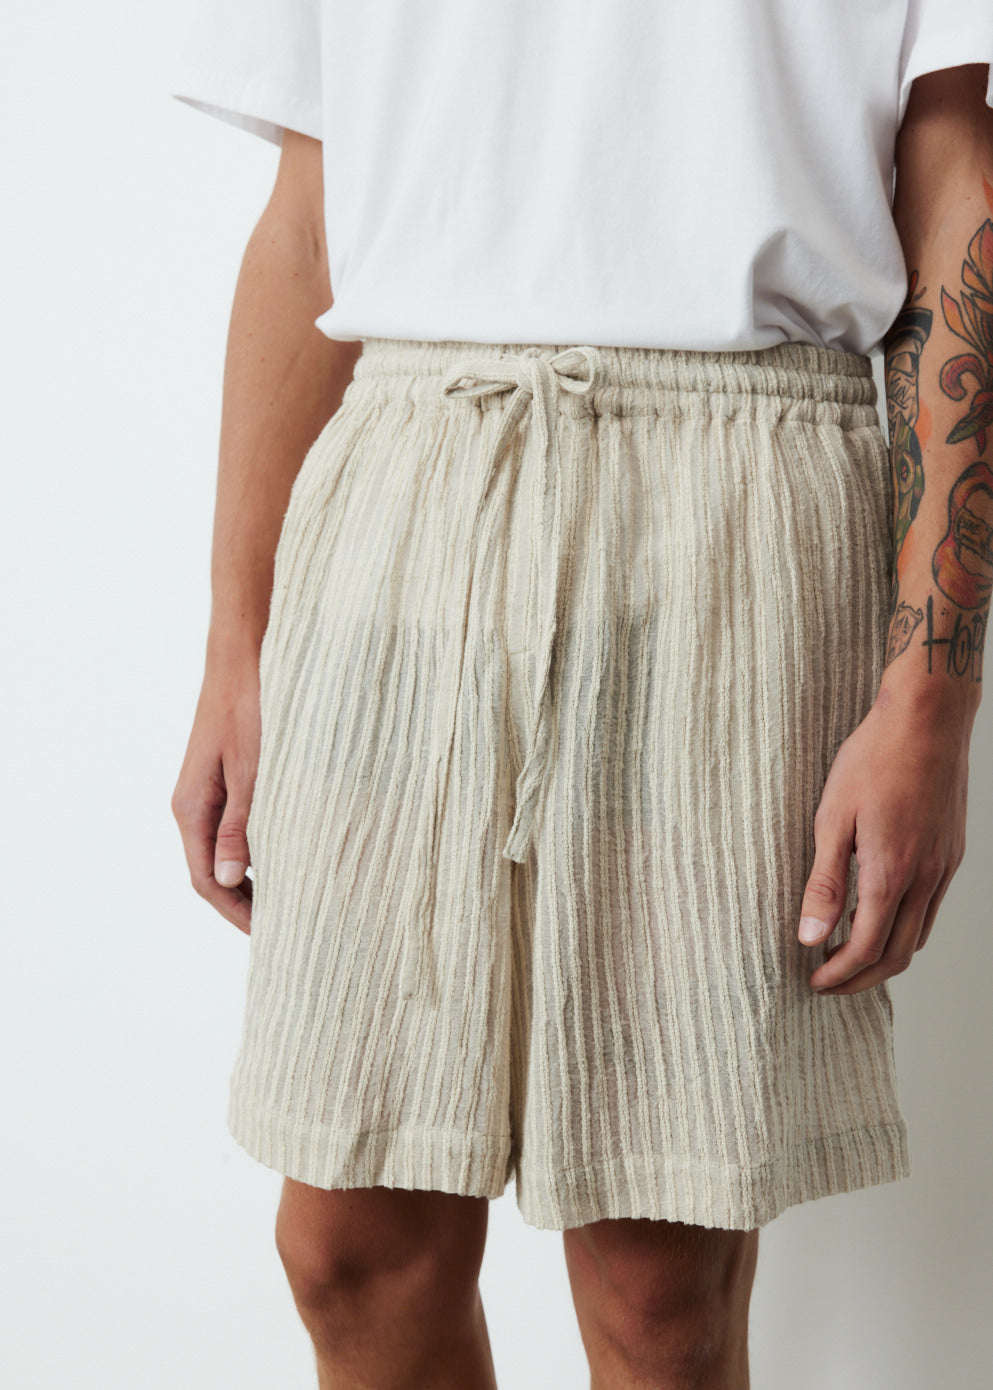 Woven Rope Shorts